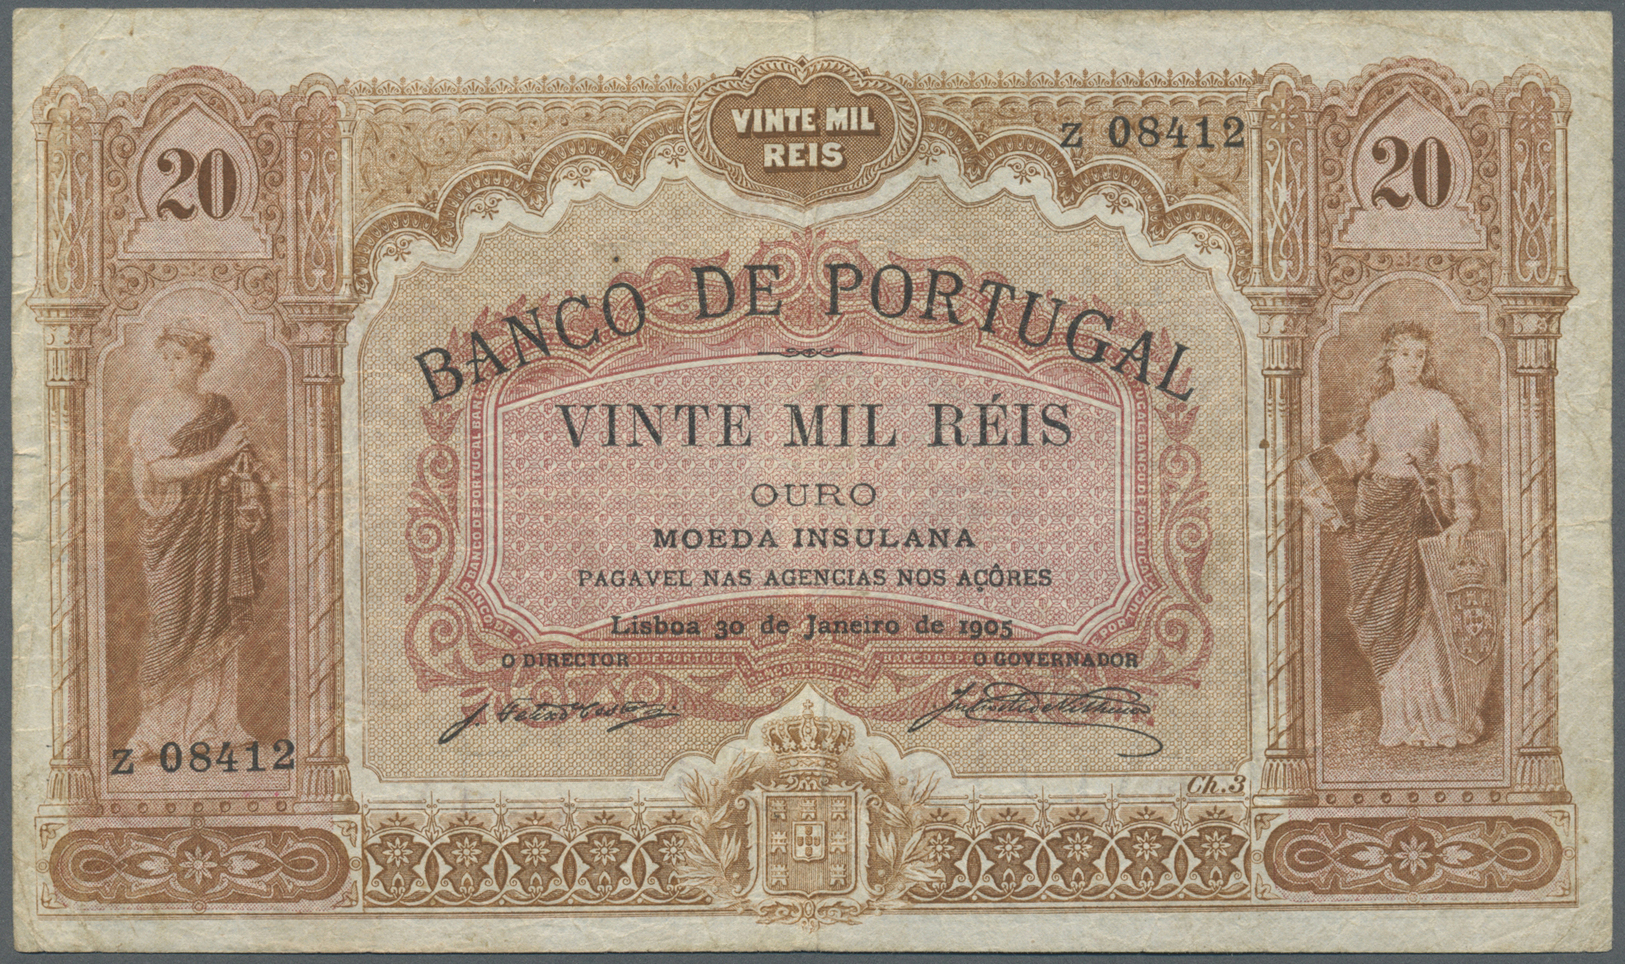 02003 Portugal: Very Rare Issue Of The Bank Of Portugal For The AZORES,  20 Mil Reis 1905 P. 13, Used With Several Folds - Portugal